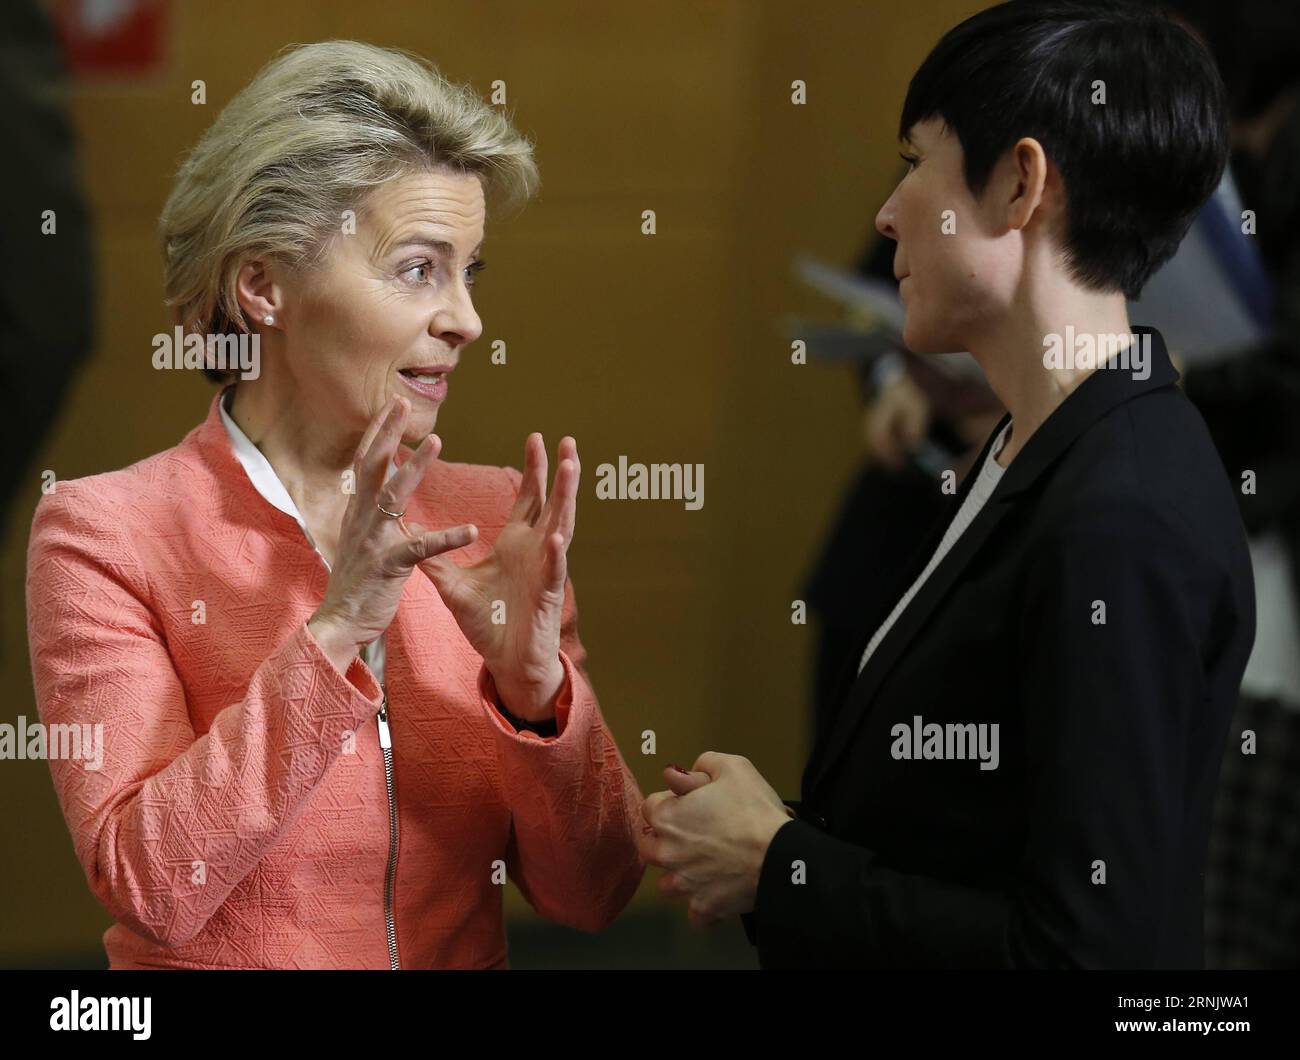 (170215) -- BRUSSELS, Feb. 15, 2017 -- German Defense Minister Ursula von der Leyen (L) talks with her Norwegian counterpart Ine Marie Eriksen Soreide during a NATO Defence Ministers Meeting at its headquarters In Brussels, Belgium, Feb. 15, 2017. ) BELGIUM-BRUSSELS-NATO-DEFENCE MINISTER-MEETING YexPingfan PUBLICATIONxNOTxINxCHN   170215 Brussels Feb 15 2017 German Defense Ministers Ursula from the Leyen l Talks With her Norwegian Part ine Marie Eriksen Soreide during a NATO Defence Minister Meeting AT its Headquarters in Brussels Belgium Feb 15 2017 Belgium Brussels NATO Defence Ministers Mee Stock Photo